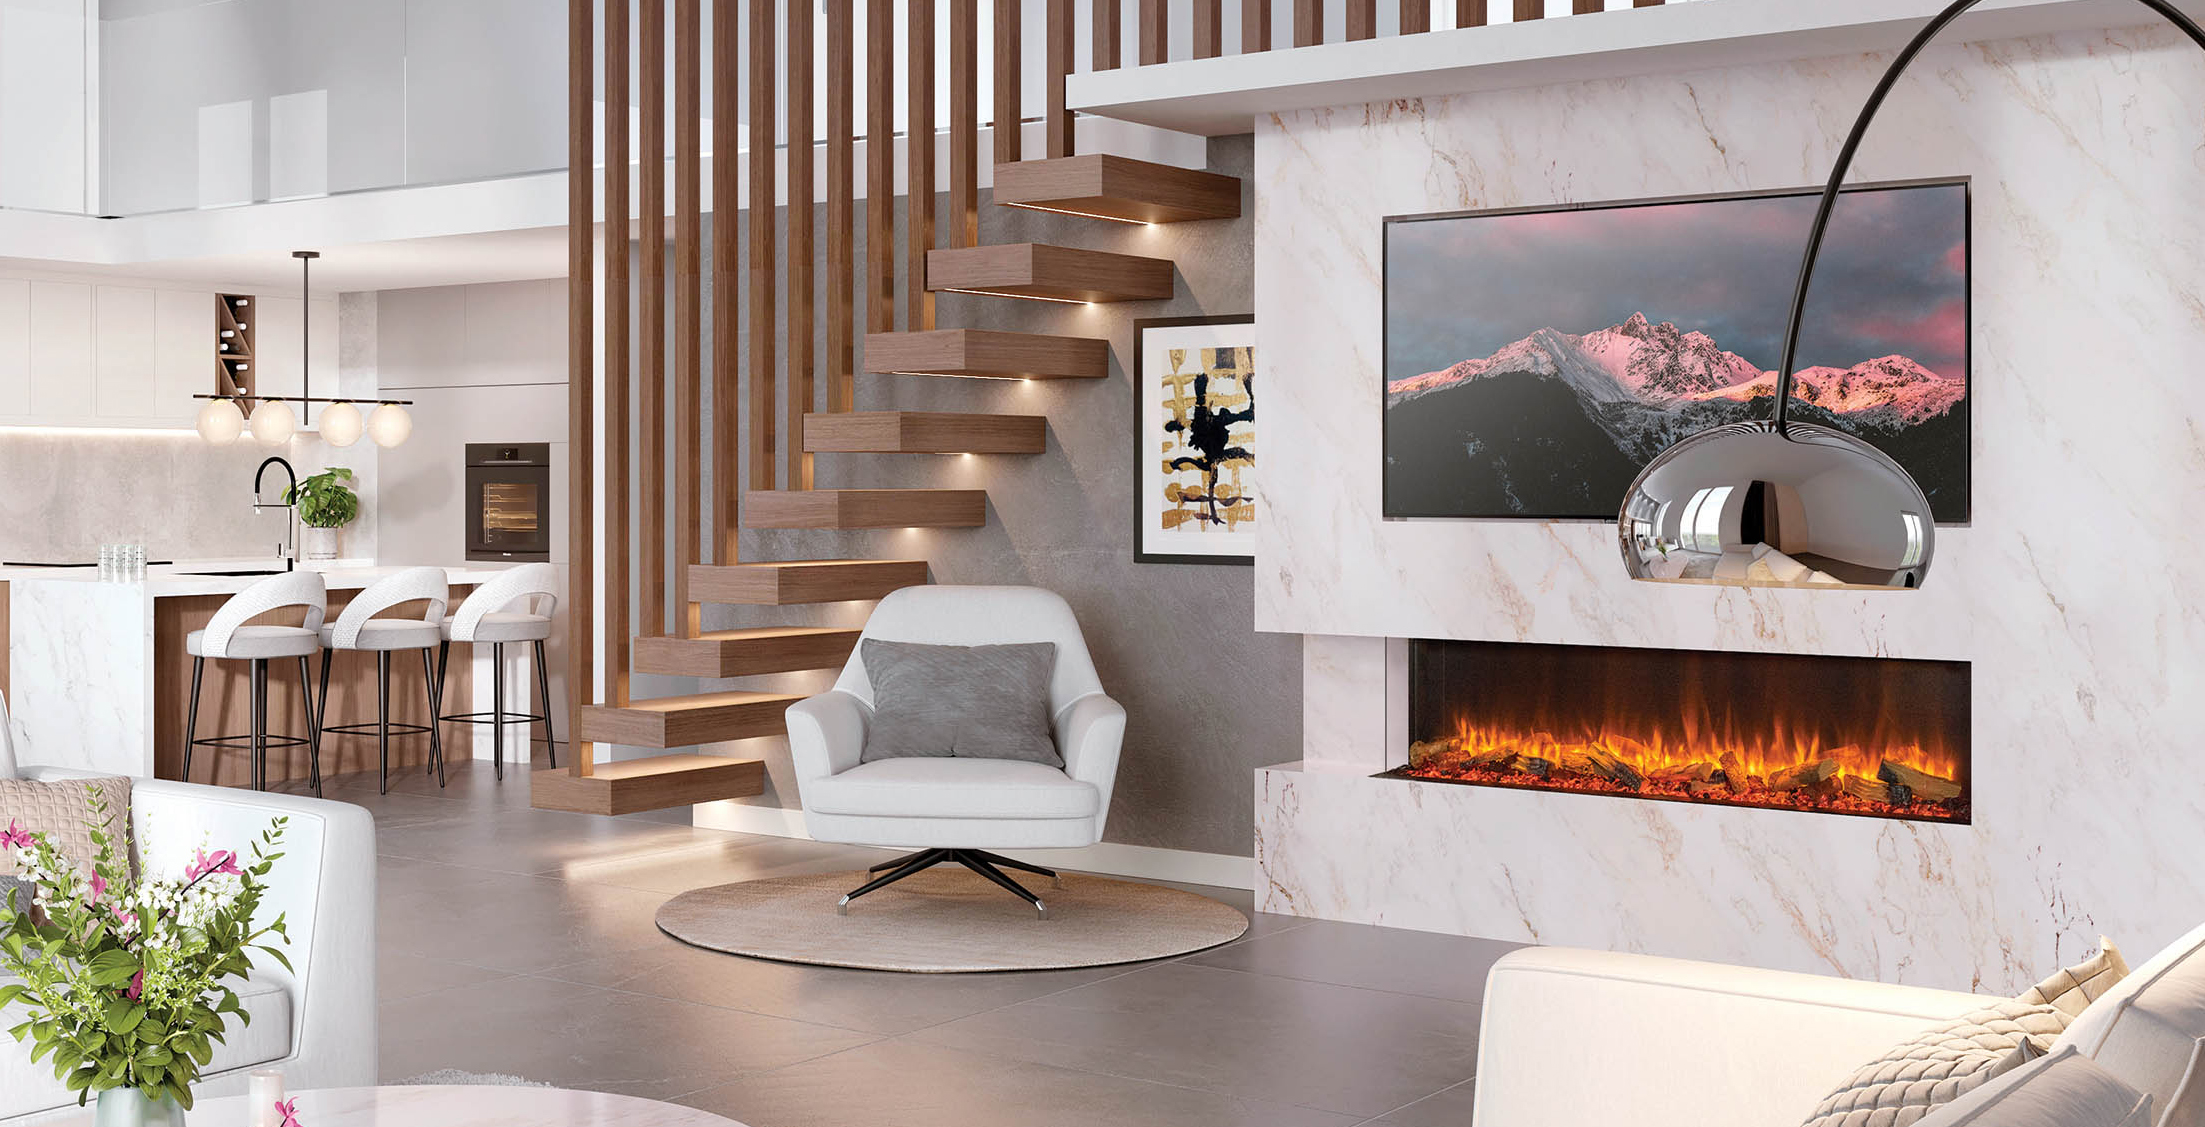 eReflex In Marble Wall as a 2-sided fireplace